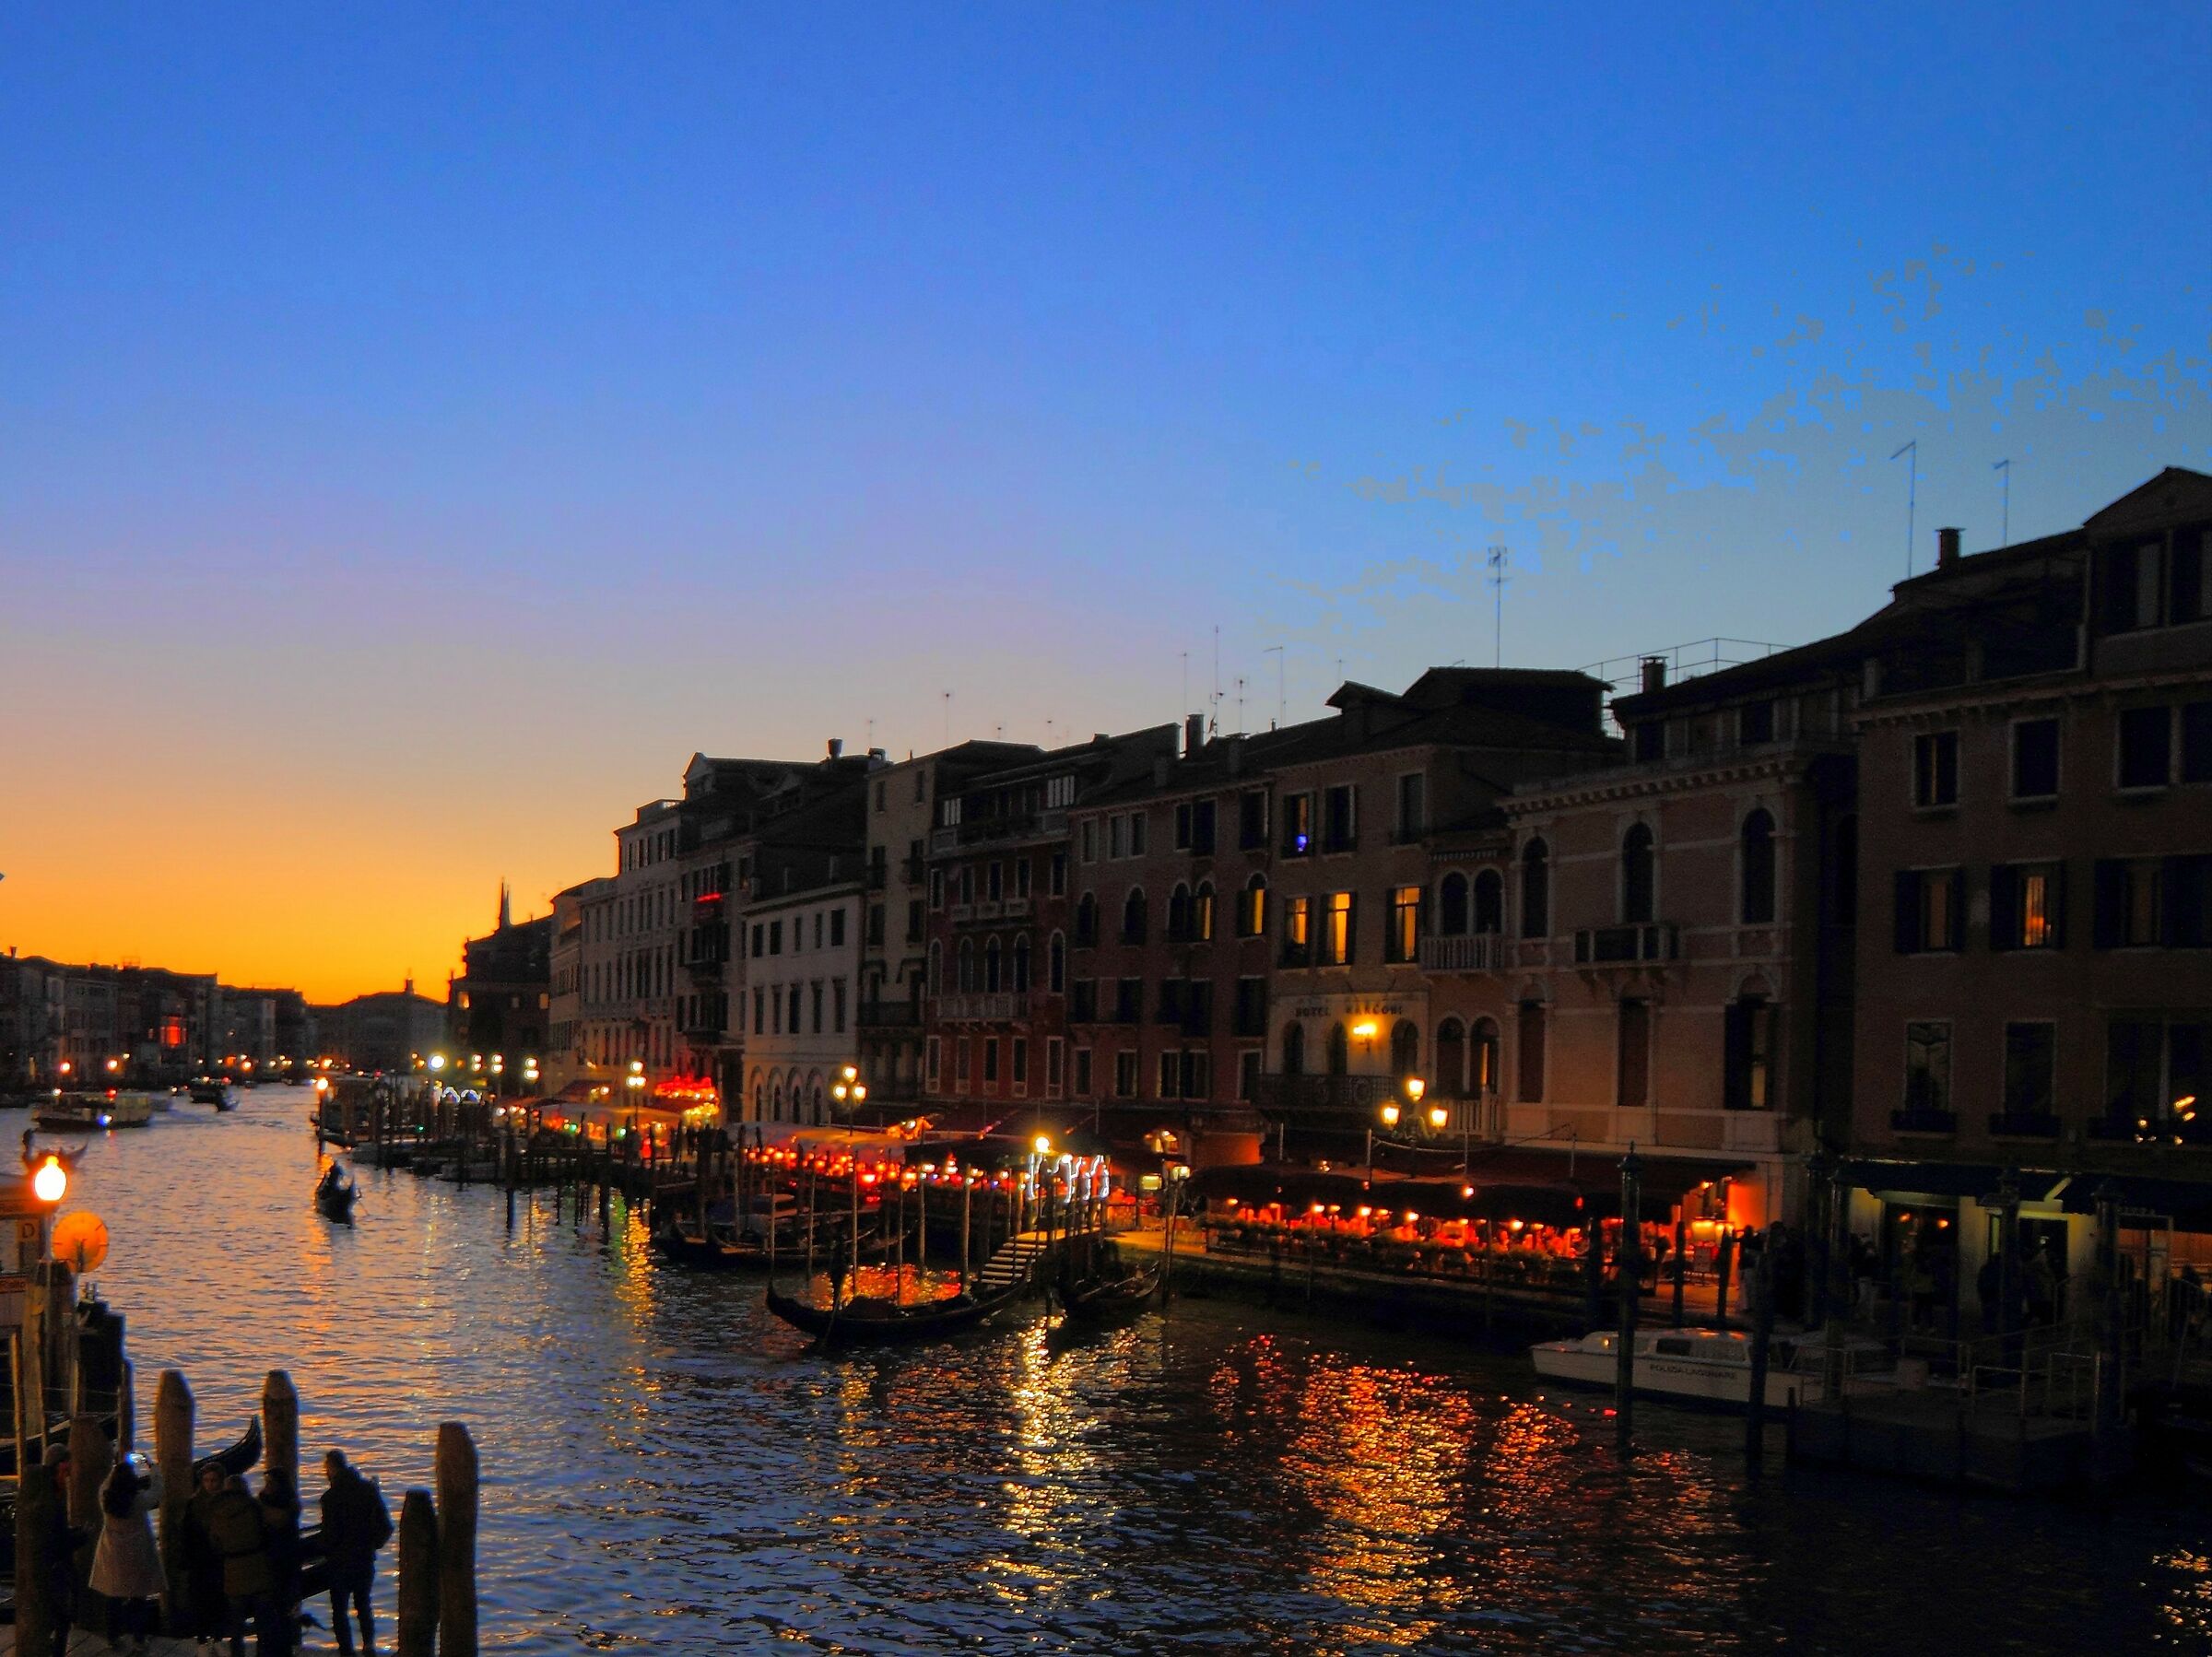 From Rialto in the evening...